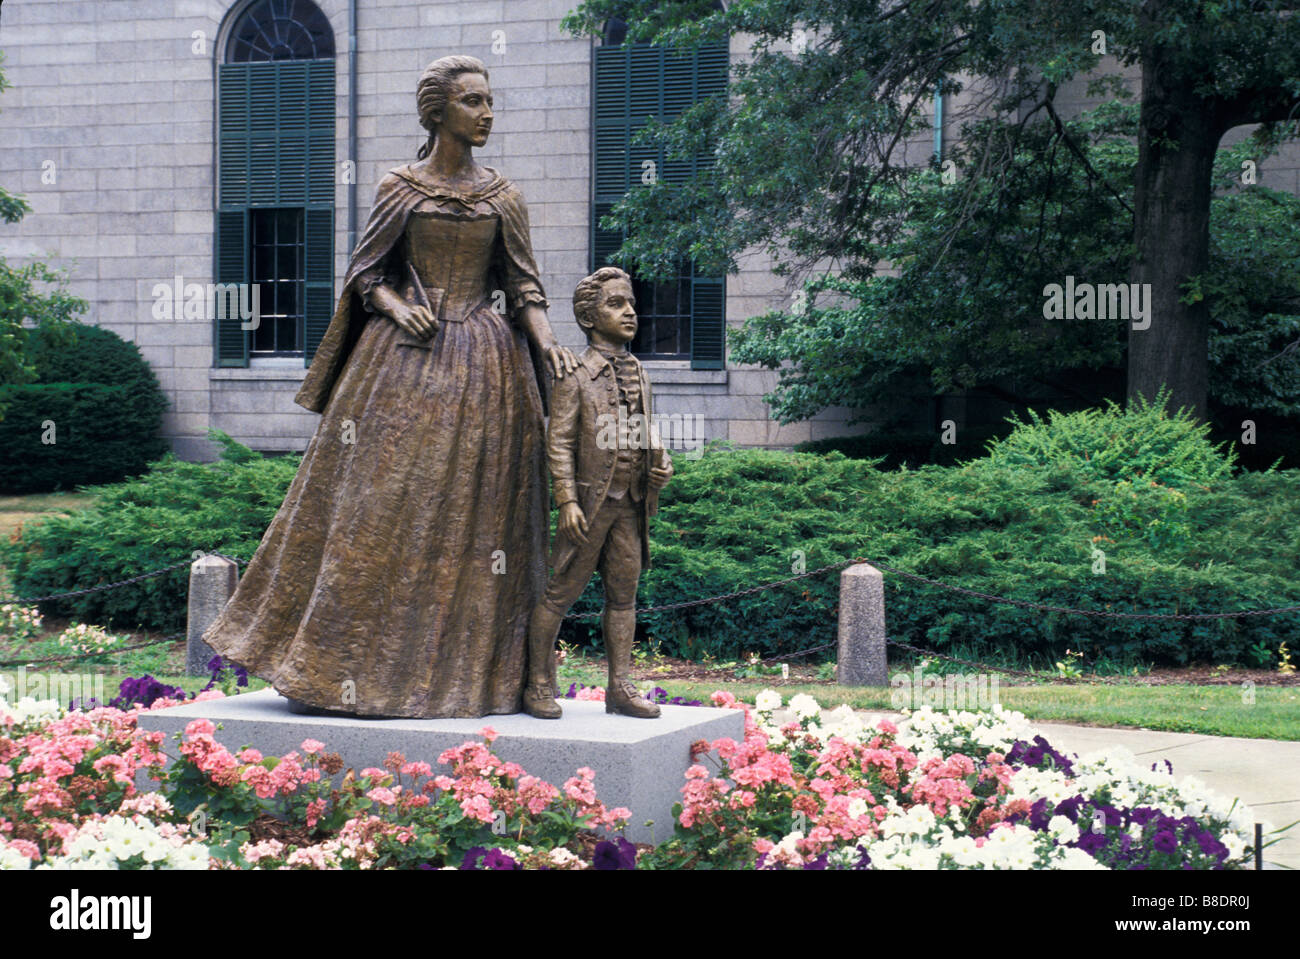 Abigail Adams with her son John Quincy Adams memorial statue outside the Adams family's church in Quincy Massachusetts. Photograph Stock Photo